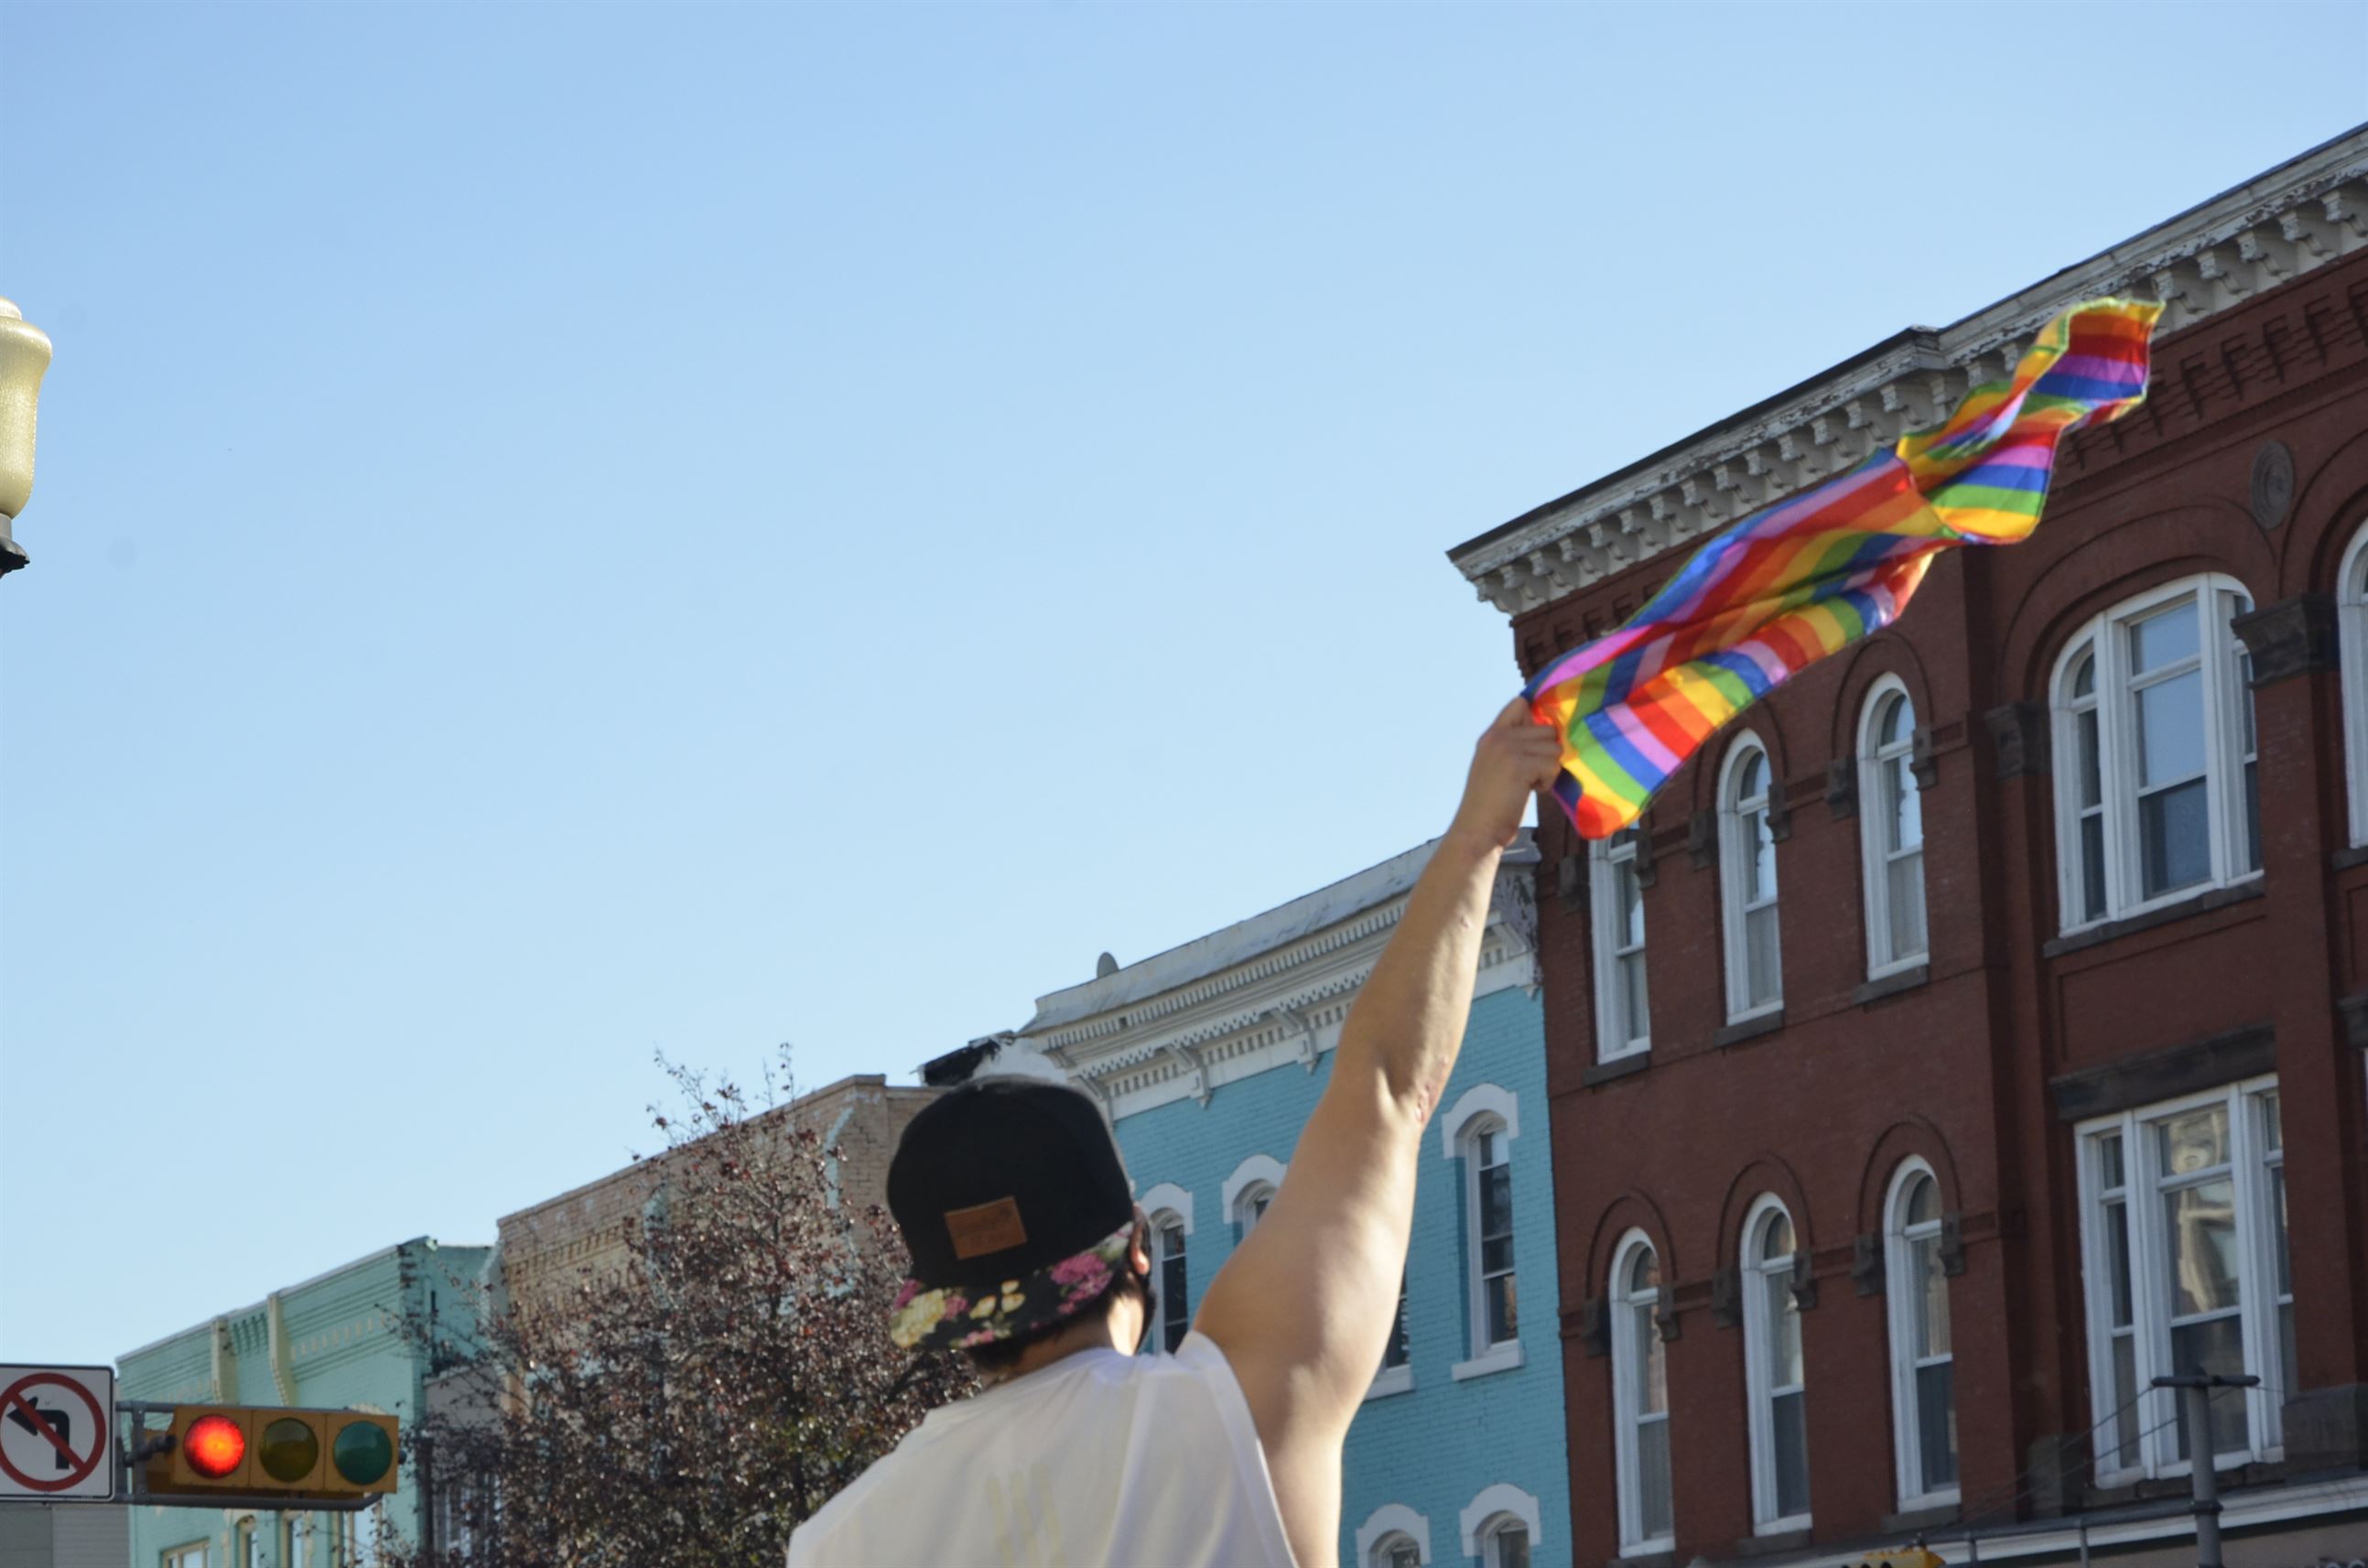 A man waves a pride flag for all of Montclair to see. John LaRosa | The Montclarion